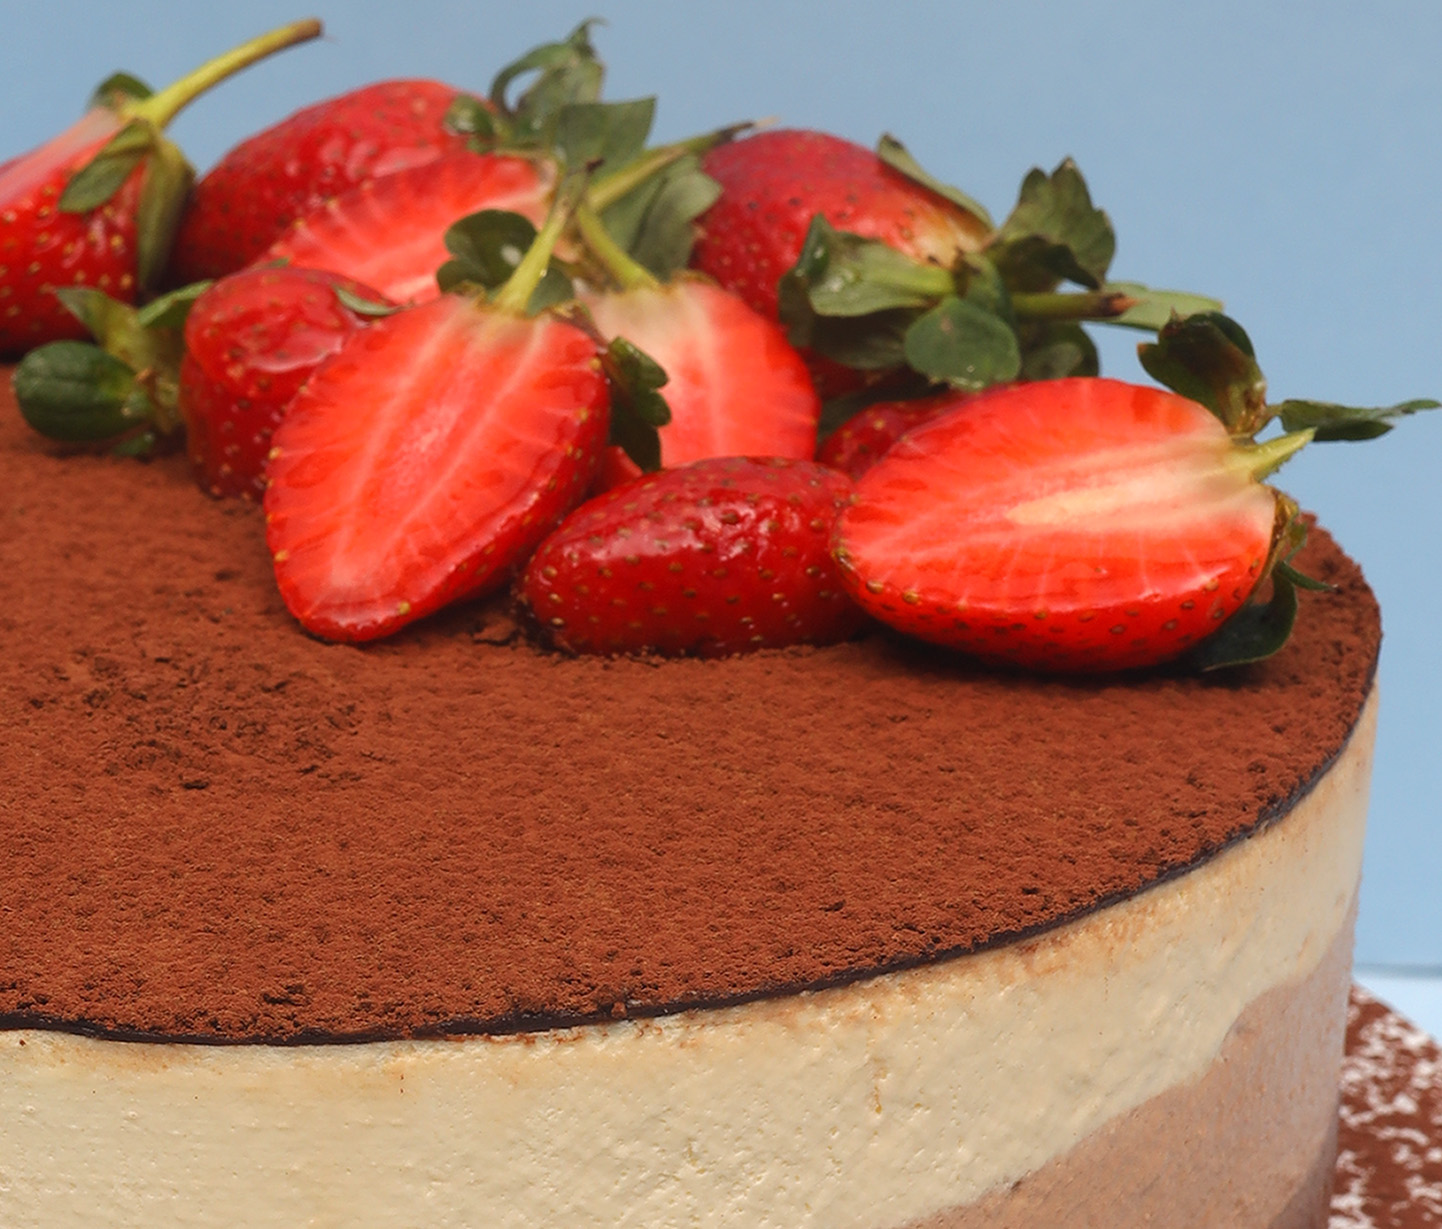 Theobroma Patisserie India - DEVIL'S MOUSSE CAKE ============ BOGOF  Mondays!! Buy One Get One Free. Monday, 21 April 2014: DEVIL'S MOUSSE CAKE  Devils mousse cake is a flourless chocolate mousse that is